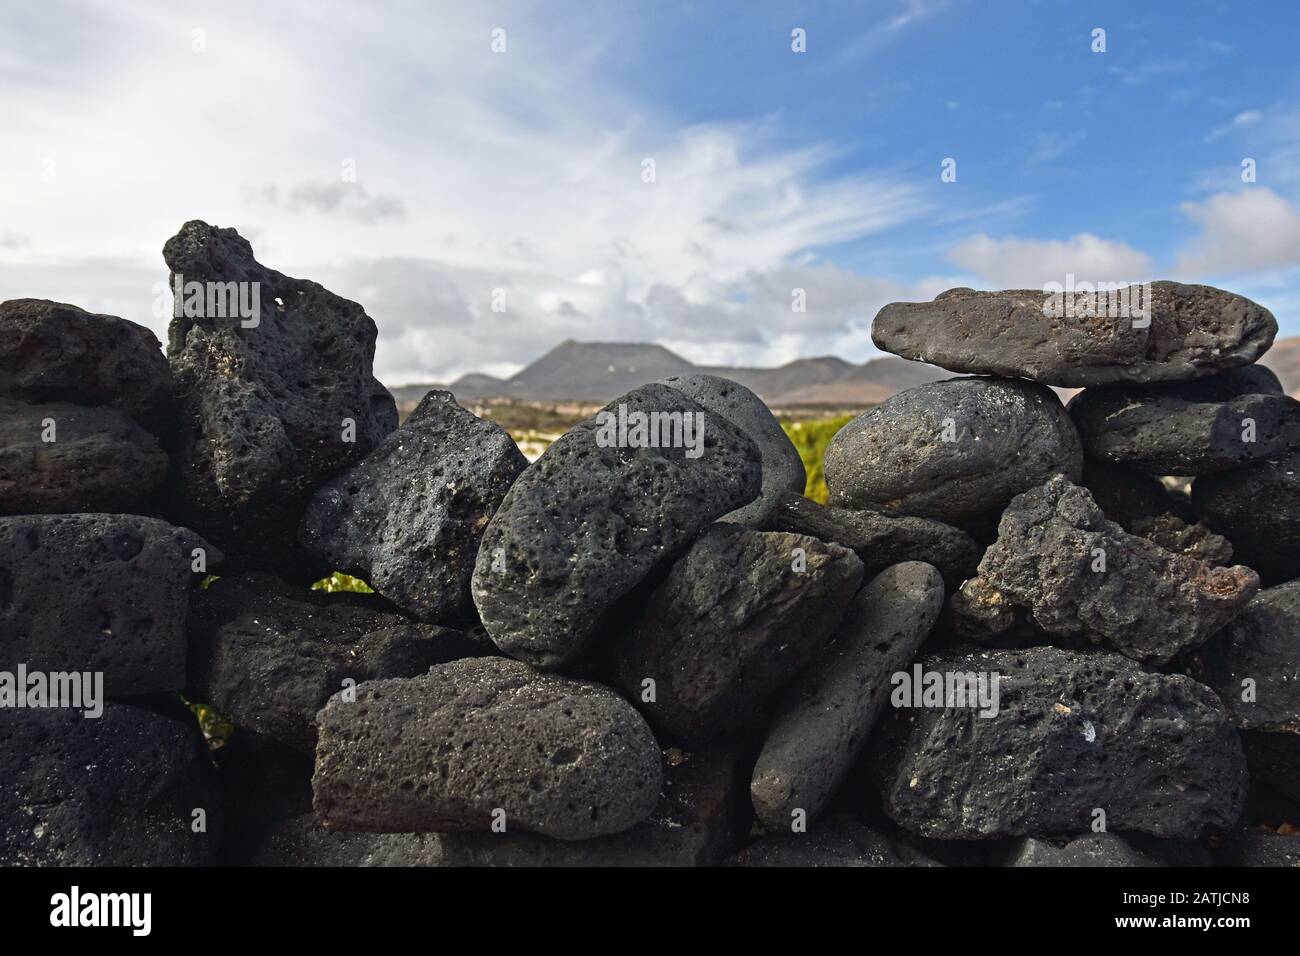 Volcanic stone wall with blurred volcano in background. Lanzarote, Spain. Stock Photo